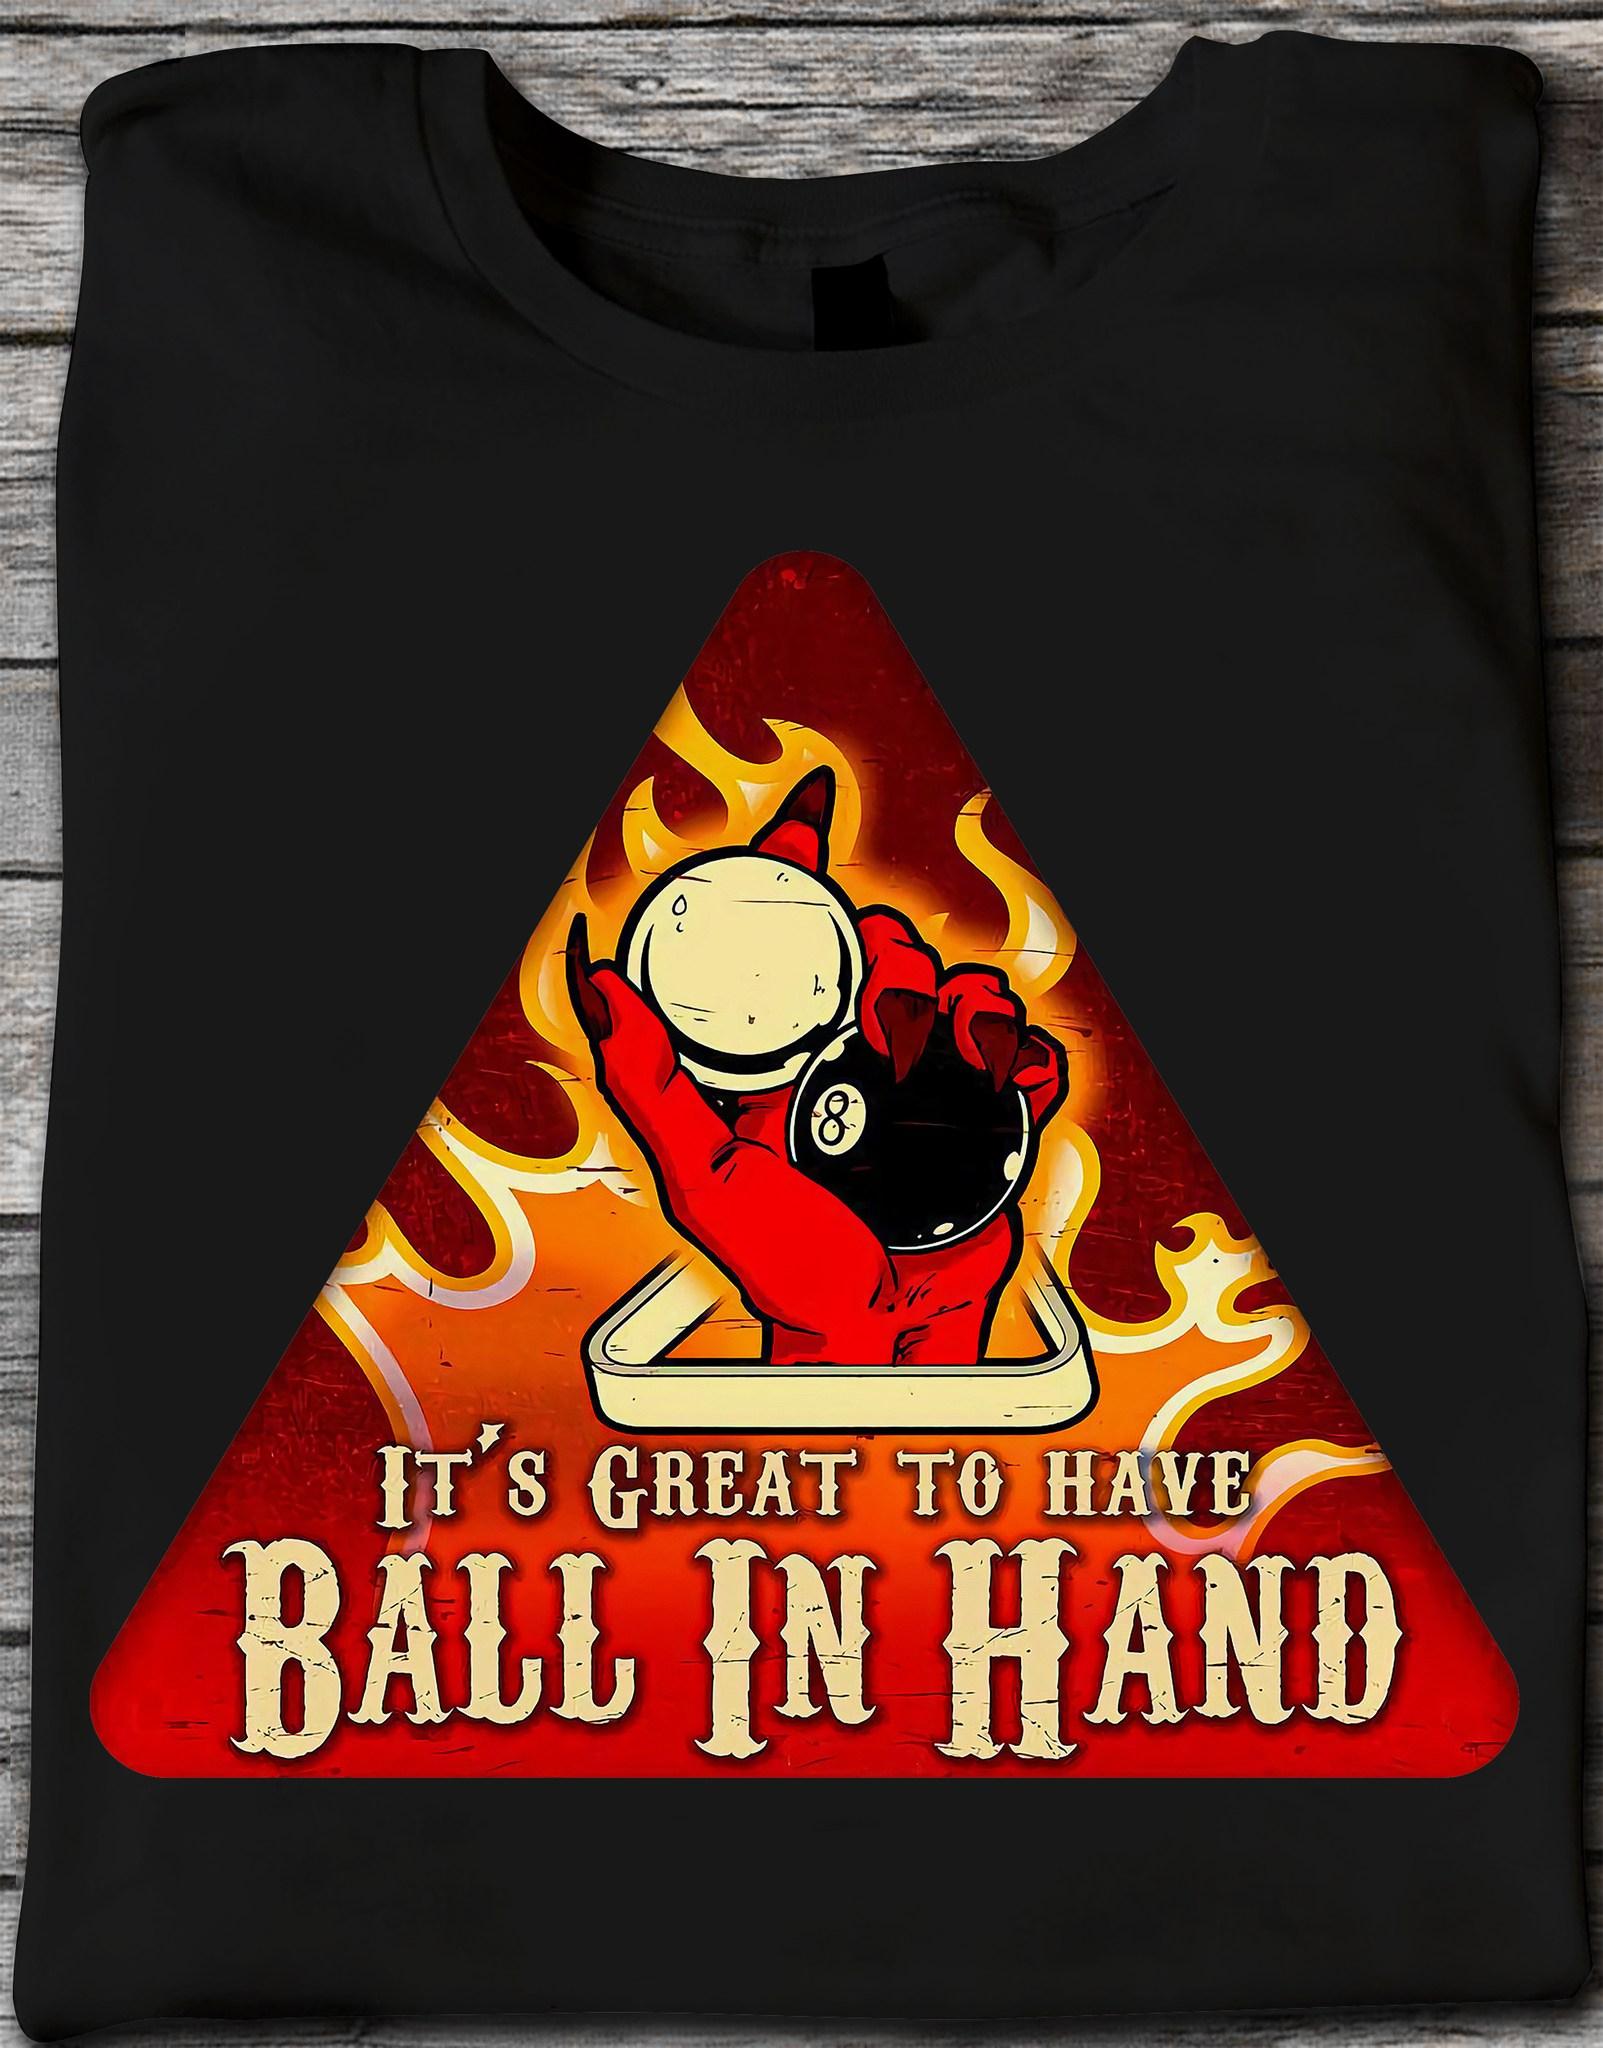 It's great to have ball in hand - Devil hand holding balls, Love playing billiard